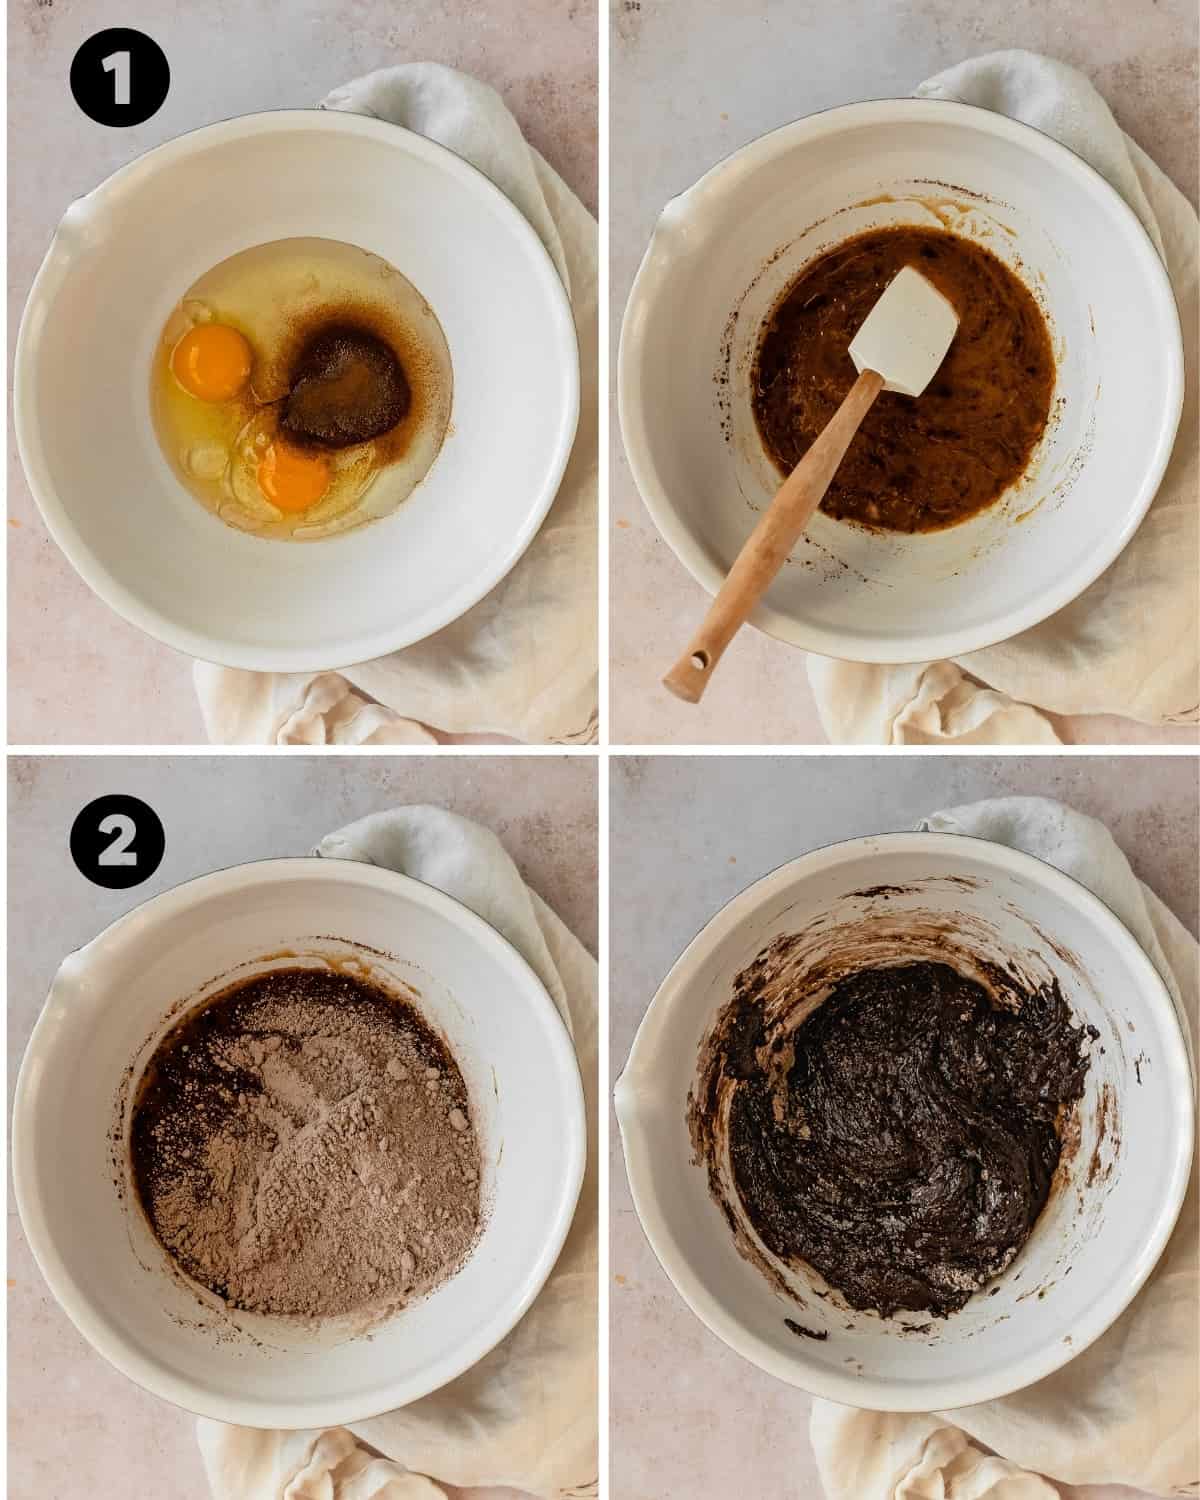 Cake Mix Brownie Recipe Steps: Mixing eggs, oil and espresso powder. Mixing cake mix until well combined. 